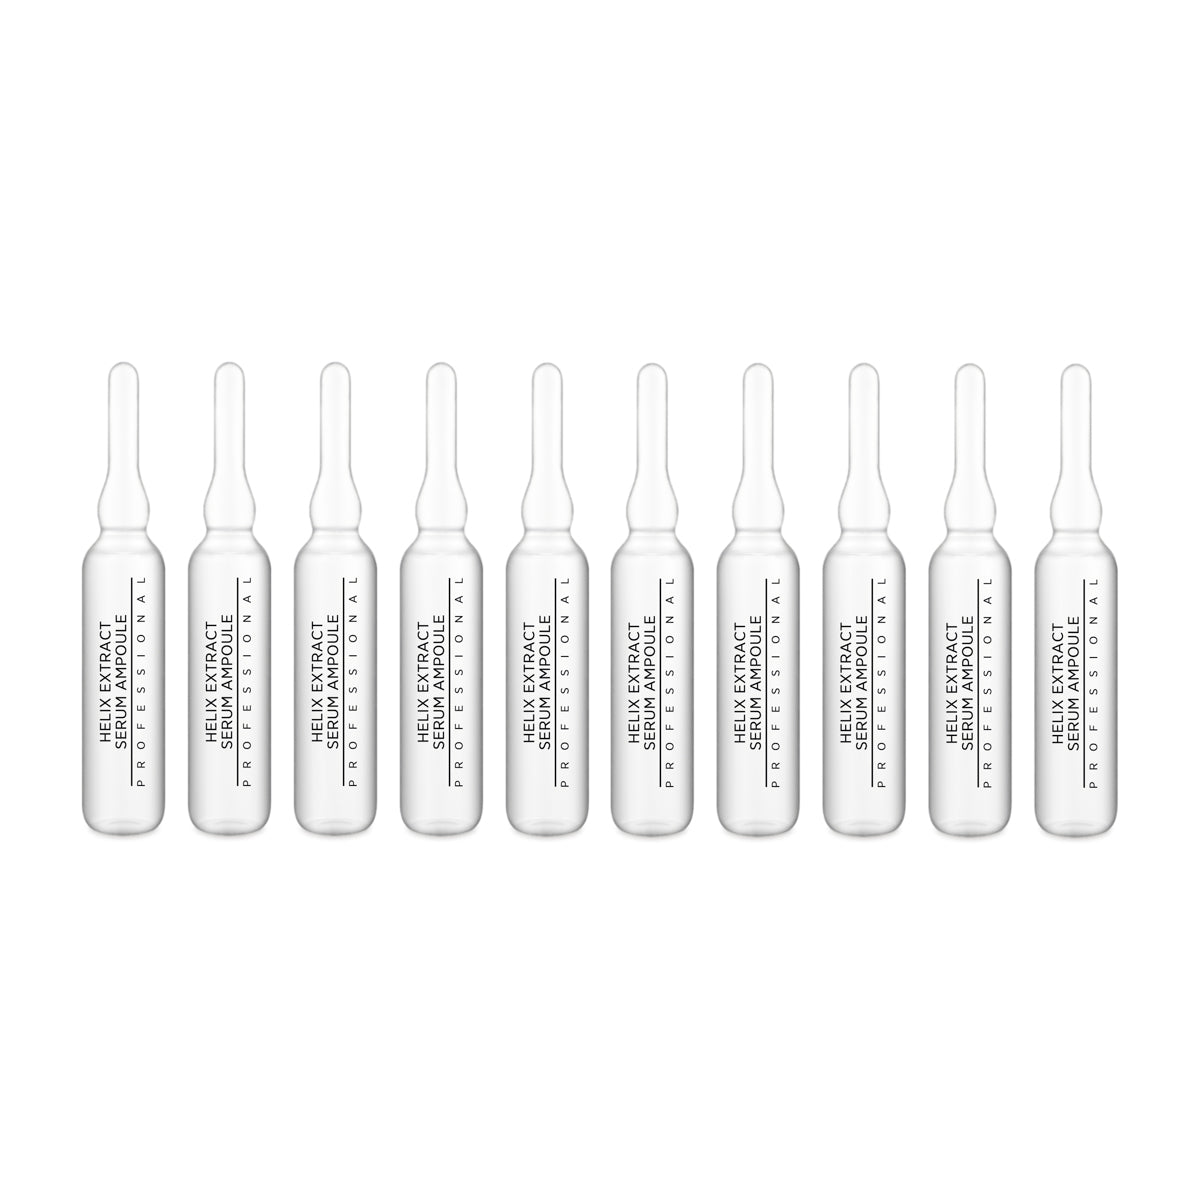 Syis ampoules with snail slime helix extract serum 10x3ml